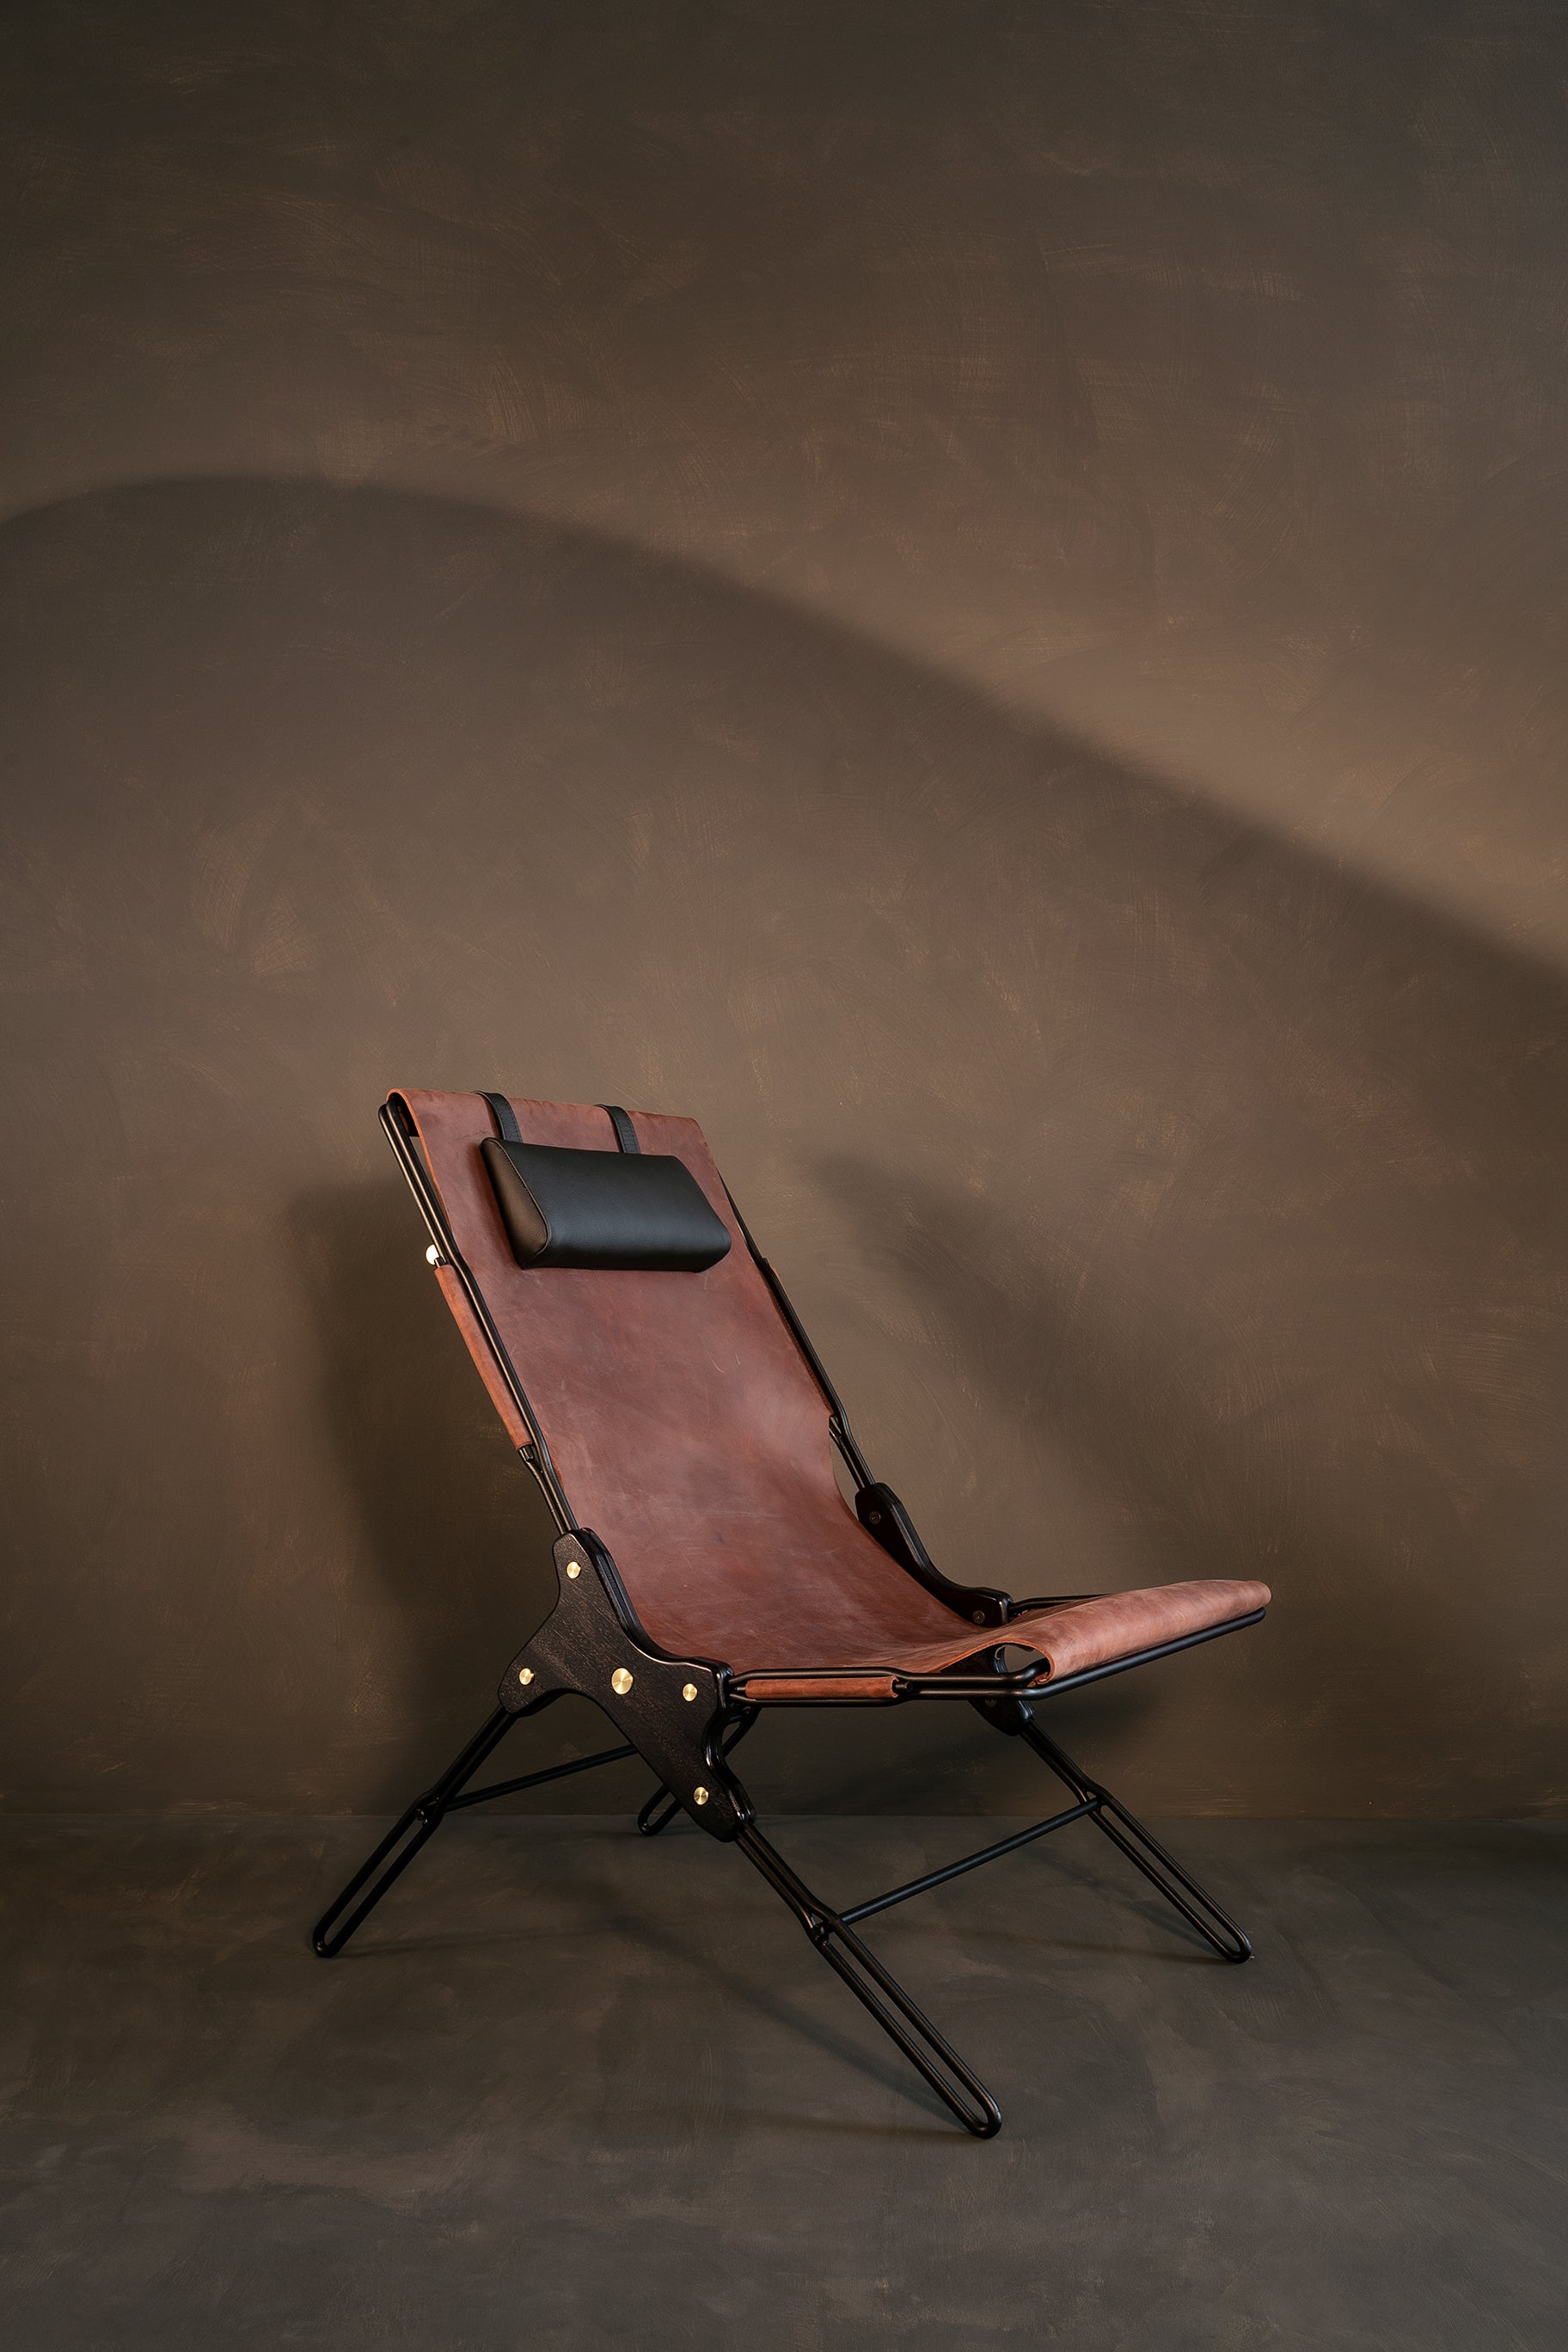 Cognac lounge chair by Estudio Andean 
Dimensions: W 56 x D 83 x H 93 cm
Materials: steel, bronze, wood, leather.

Lounge chair made of steel rod structure and solid colorado wood with a natural oil finish, Ecuadorian sustainable cowhide leather